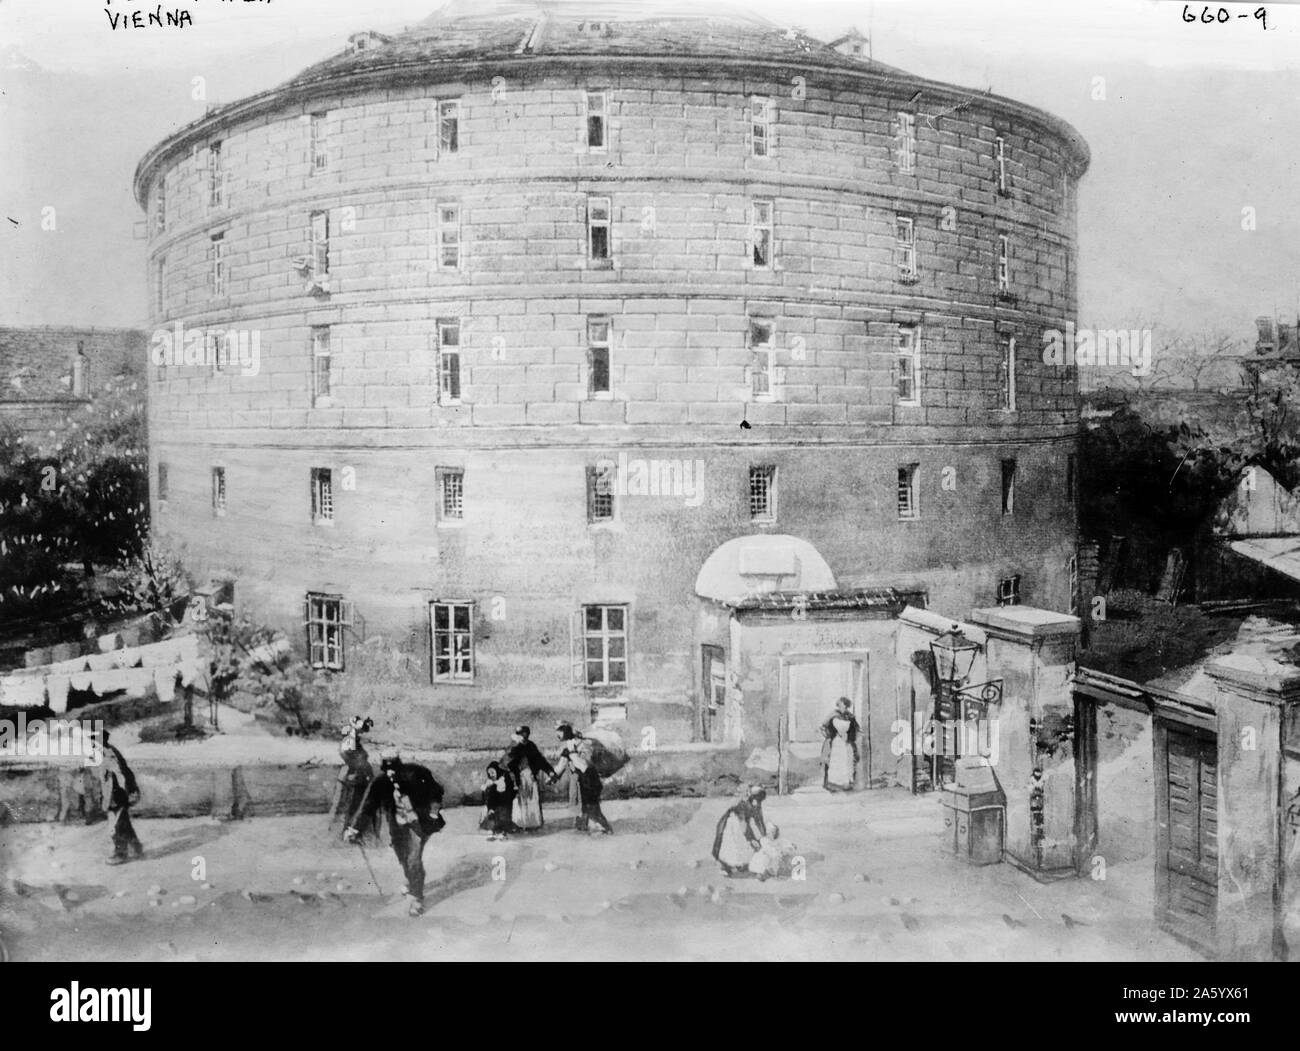 the Narrenturm, or Fools’ Tower, Vienna, Austria. Constructed in 1784 by court architect Isidor Canevale, the cylindrical tower was the first asylum where the insane were housed and treated. 1900 Stock Photo